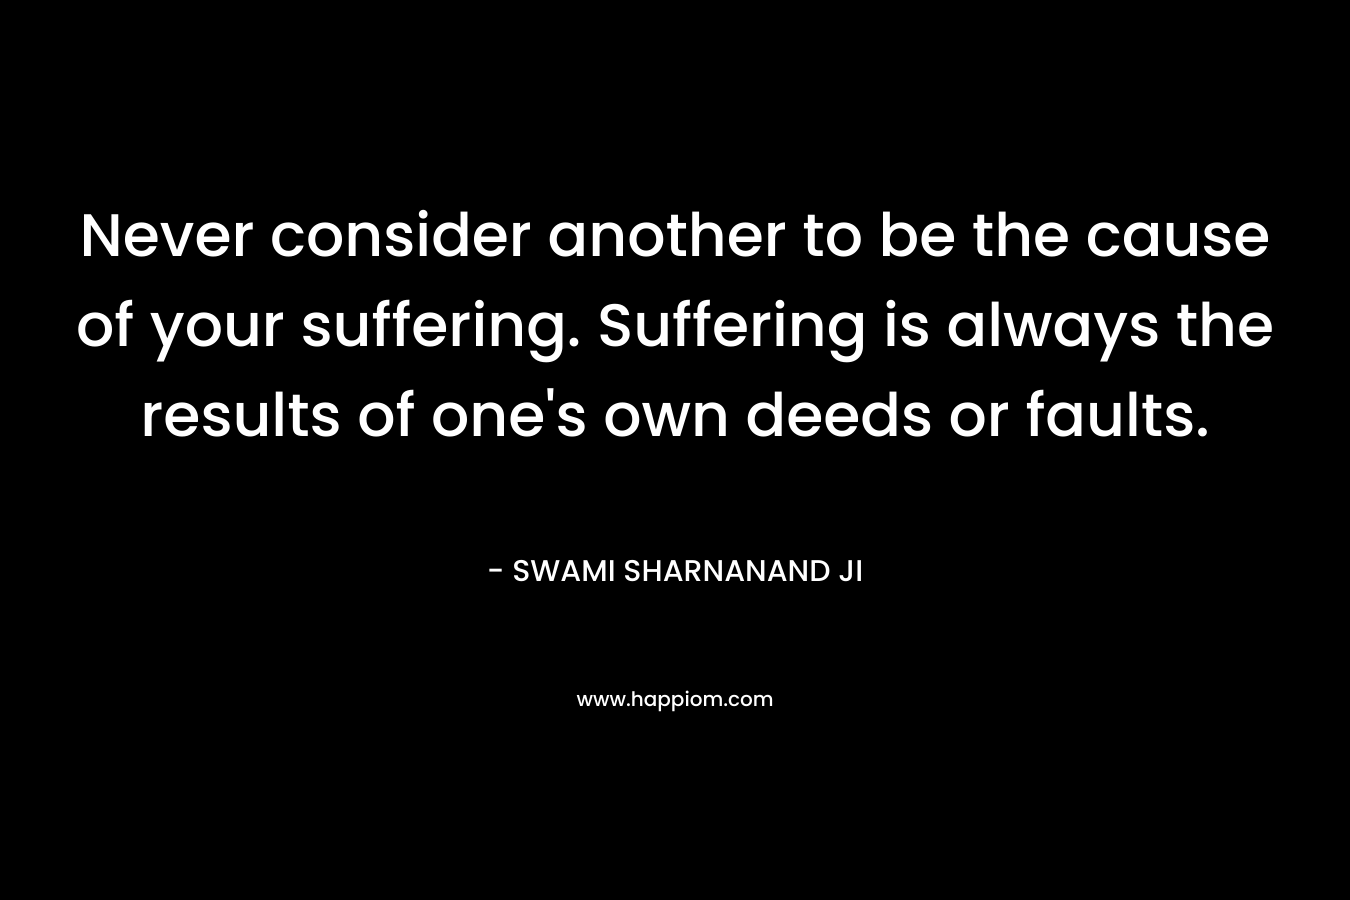 Never consider another to be the cause of your suffering. Suffering is always the results of one's own deeds or faults.